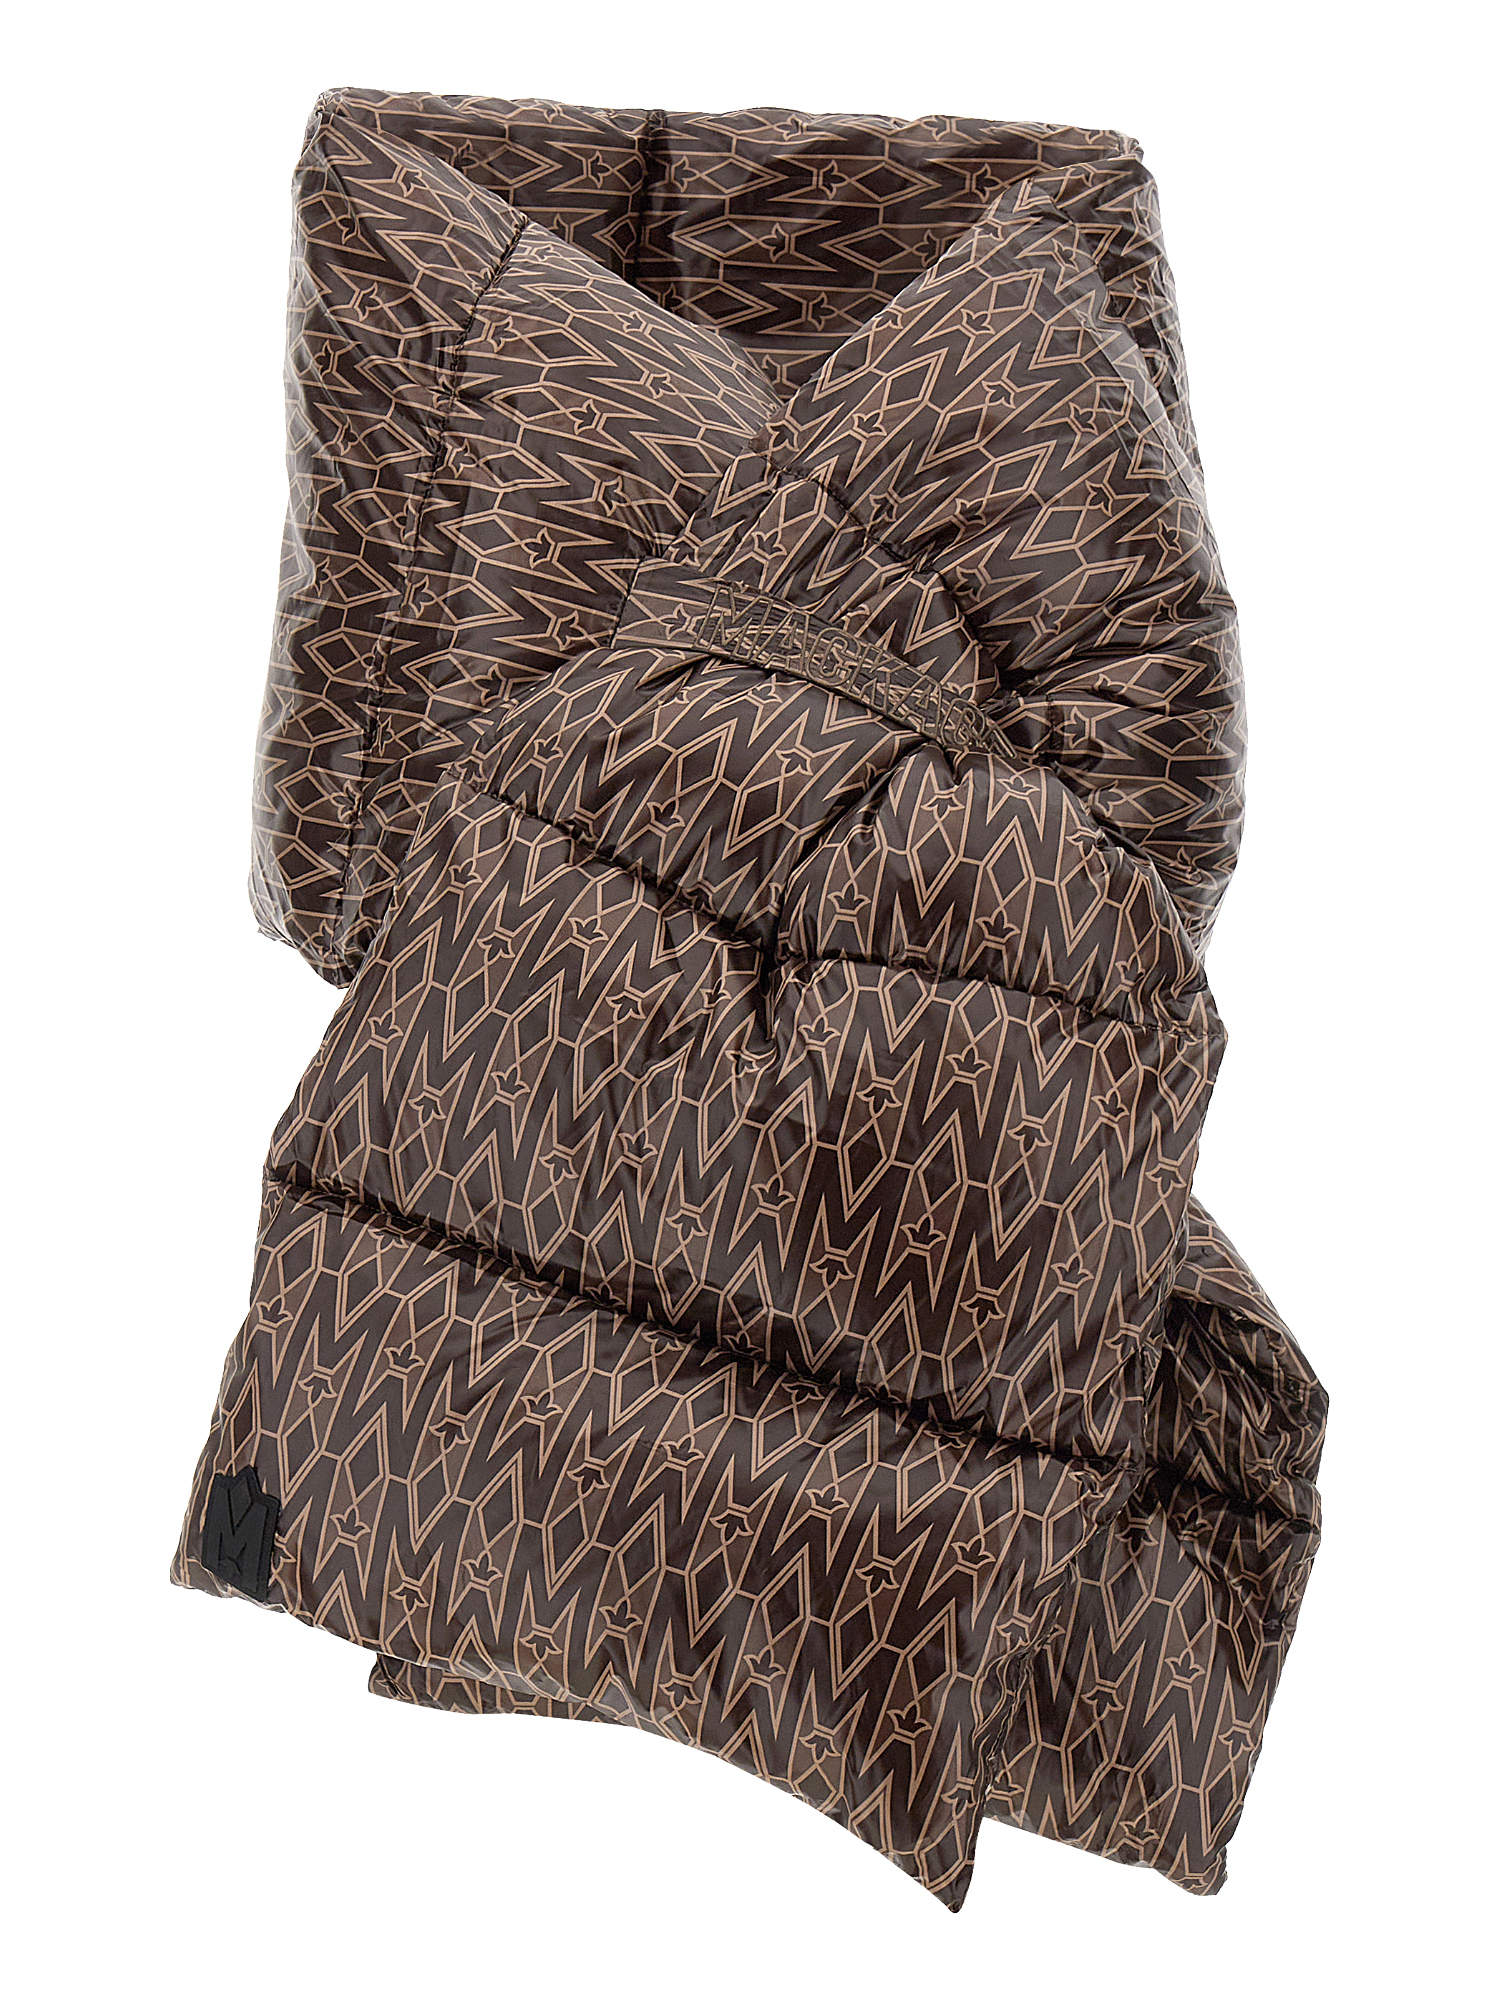 MACKAGE WOMEN'S SCARVES AND SHAWLS - MACKAGE - IN BROWN SYNTHETIC FIBERS